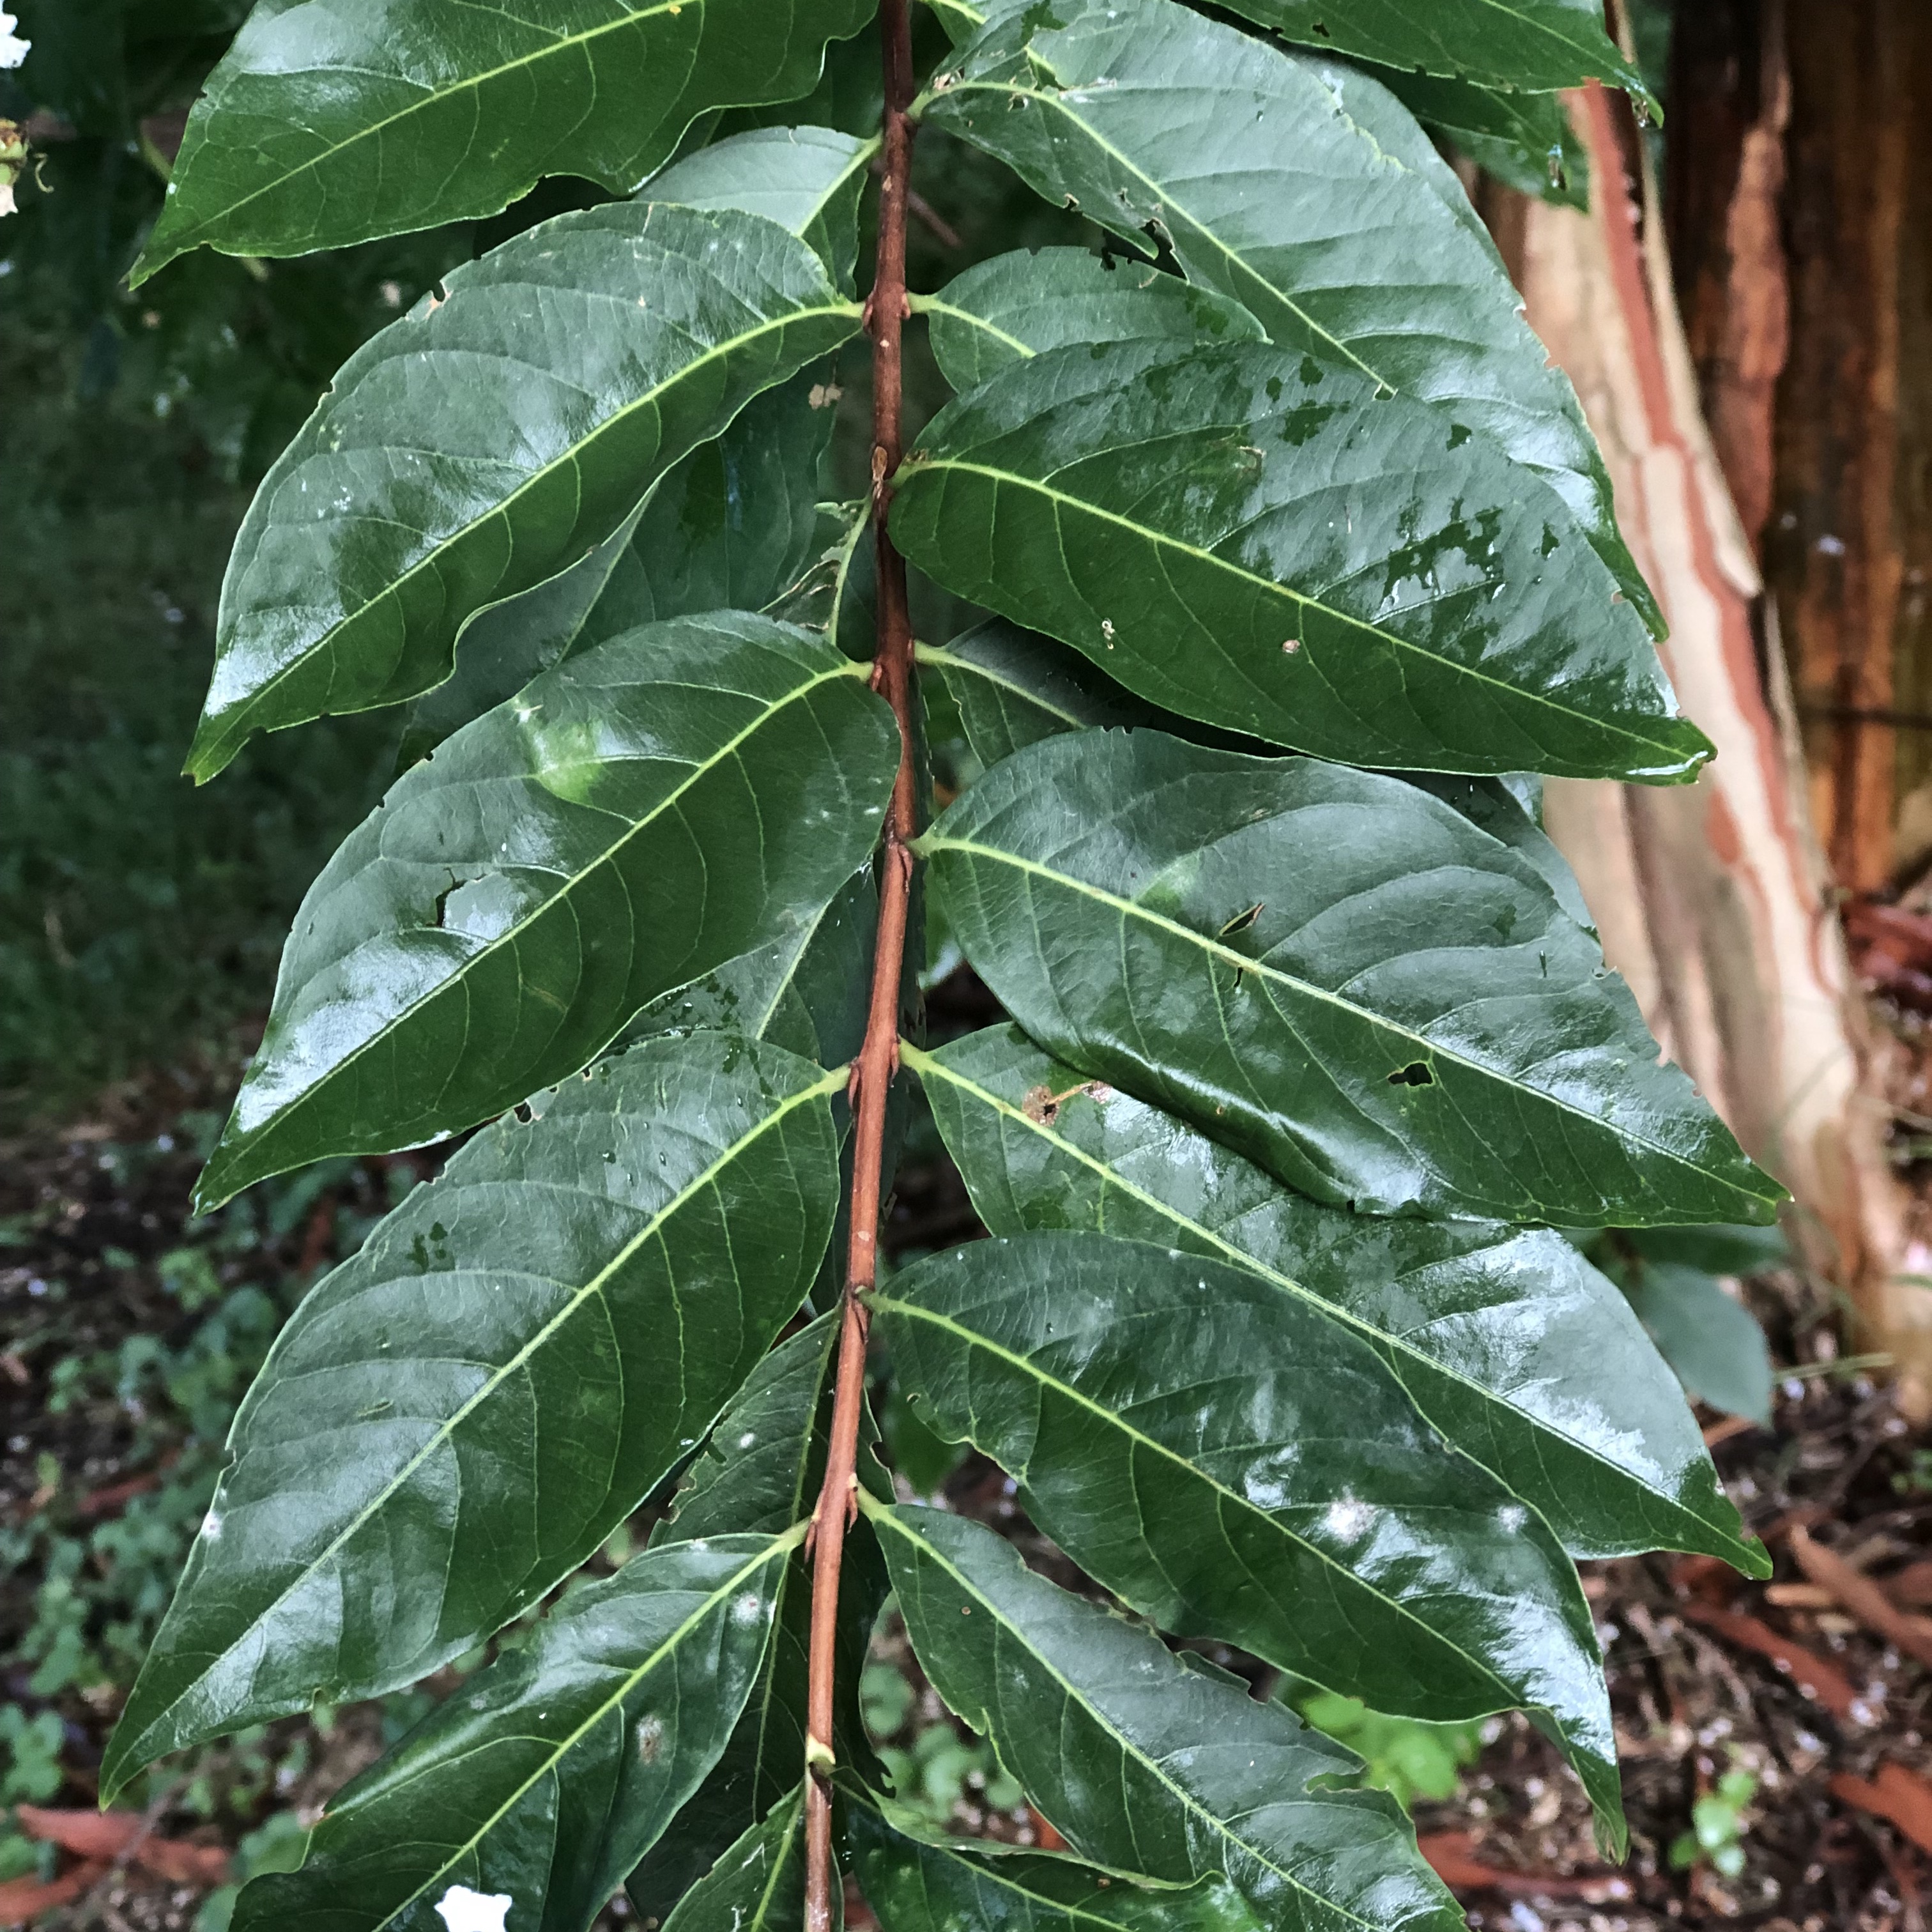 Crepe myrtle leaves on a tree in Great Falls, VA